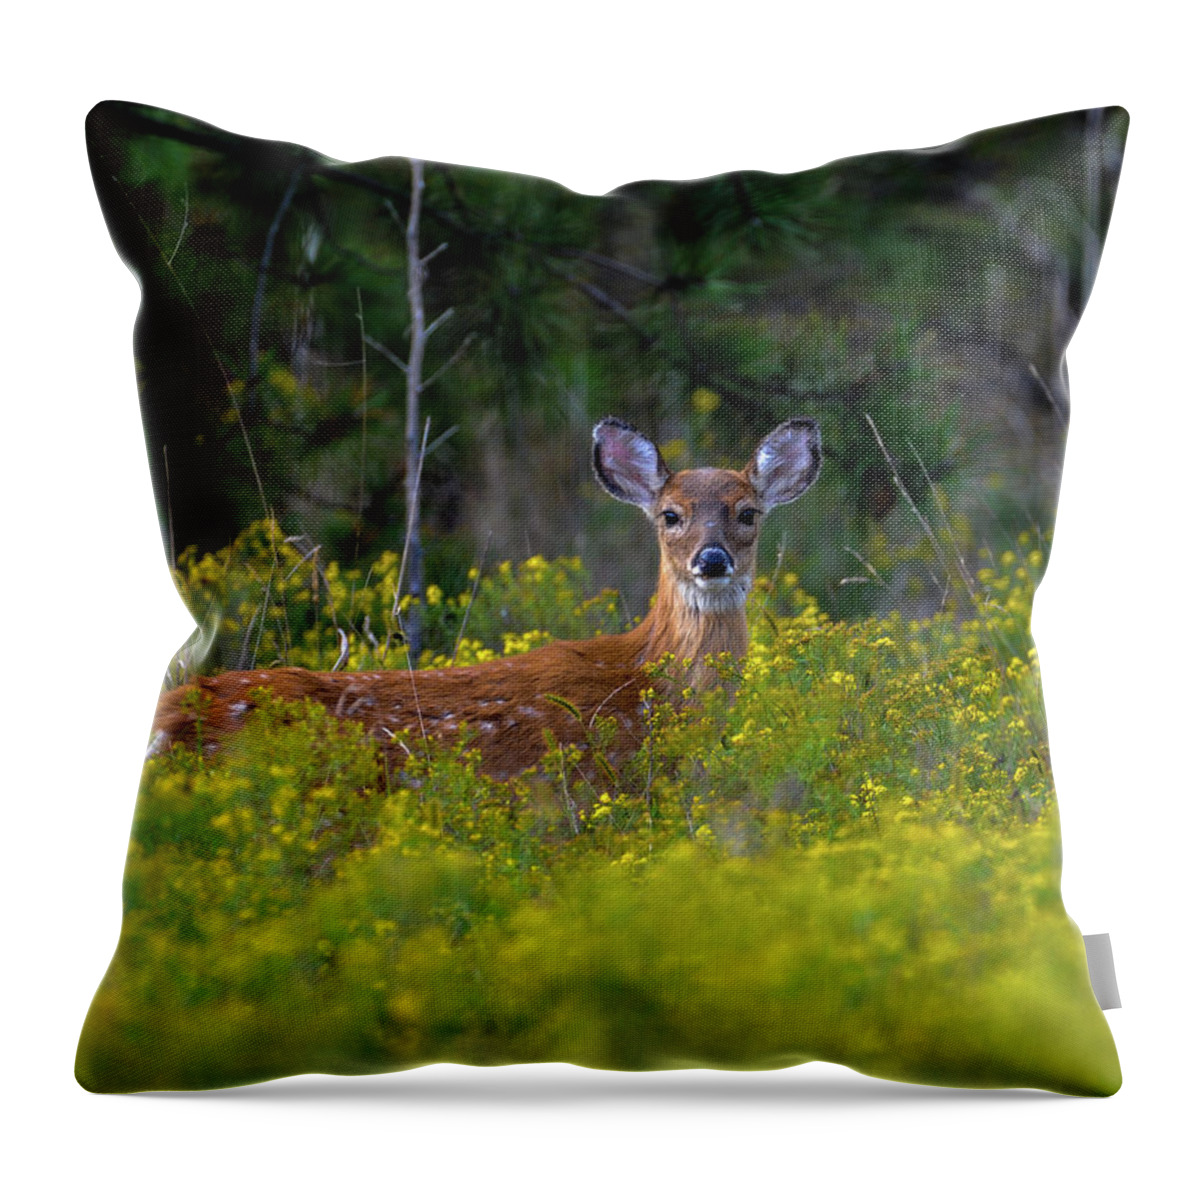 Wildlife Throw Pillow featuring the photograph Alert Fawn by Cathy Kovarik